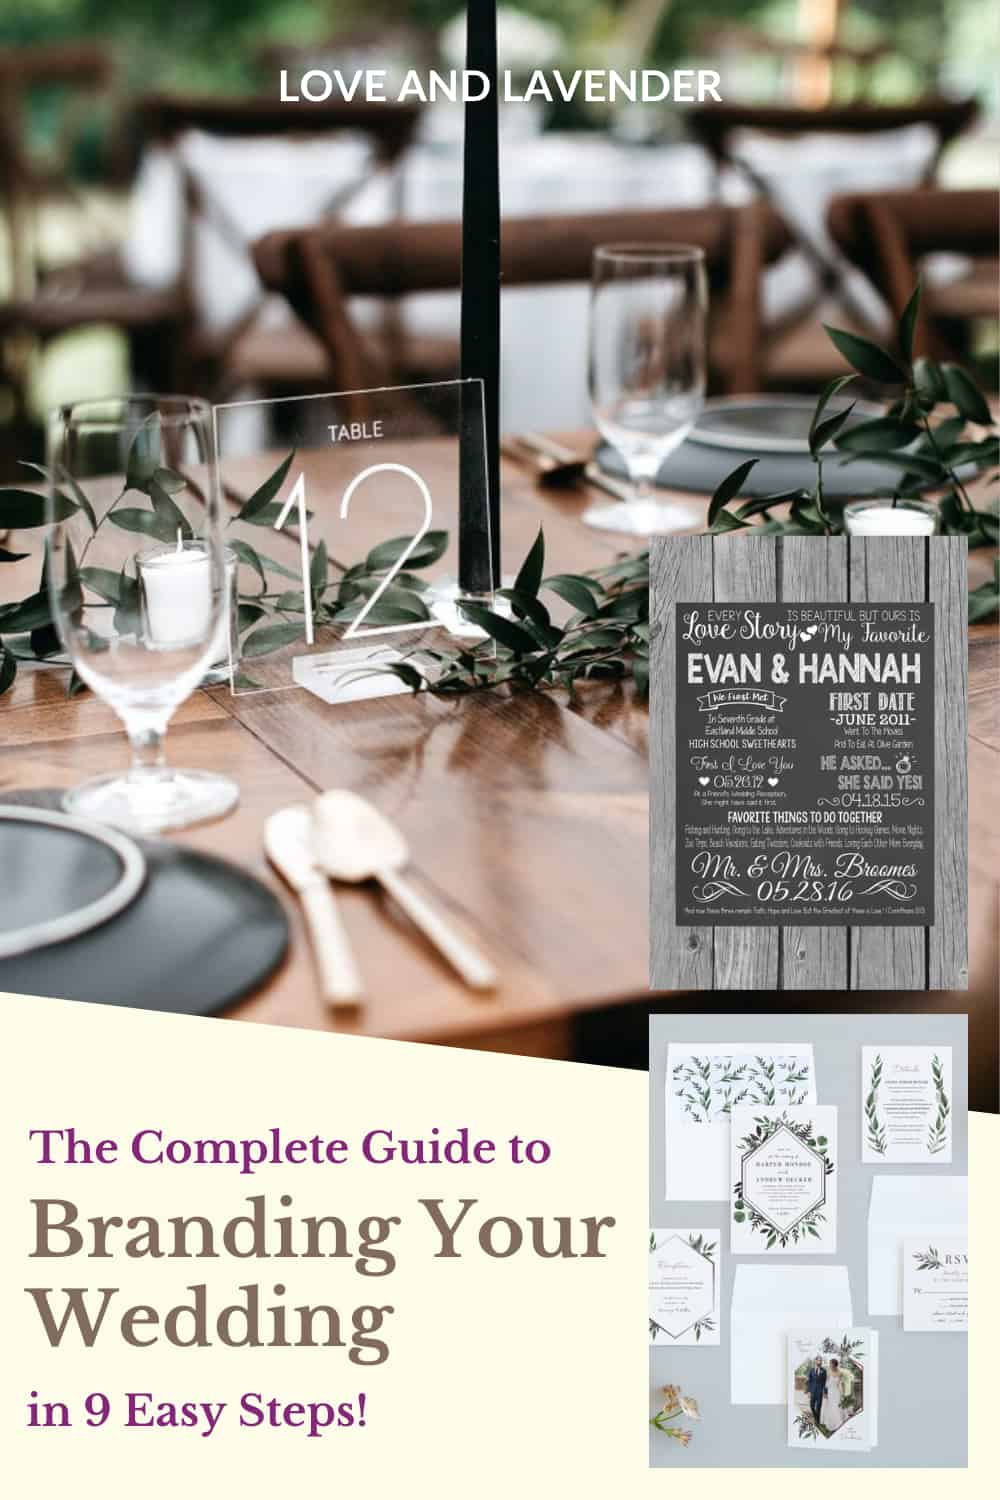 The Complete Guide to Branding Your Wedding - Pinterest pin